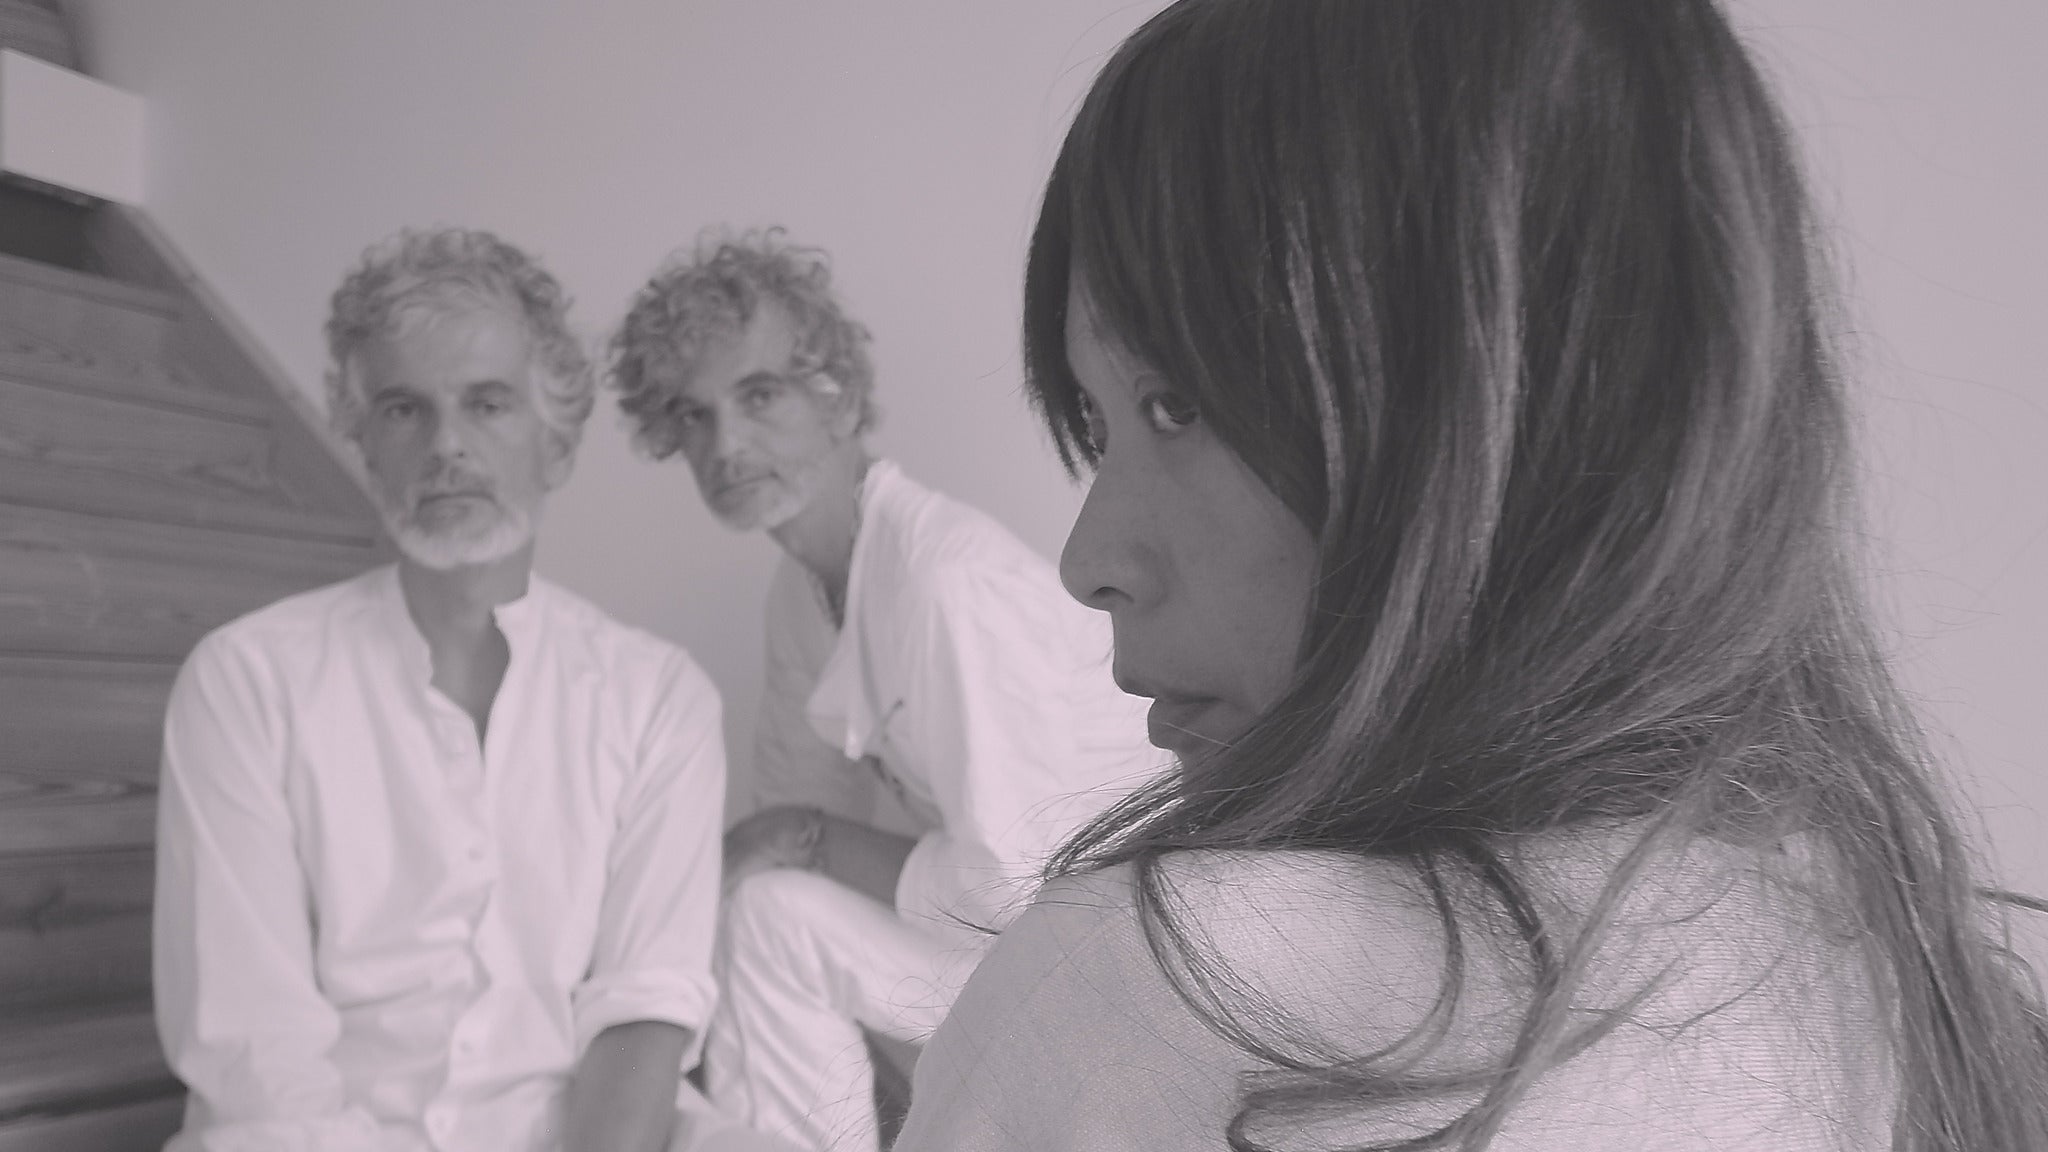 exclusive presale code to Blonde Redhead face value tickets in Somerville at Crystal Ballroom at Somerville Theatre